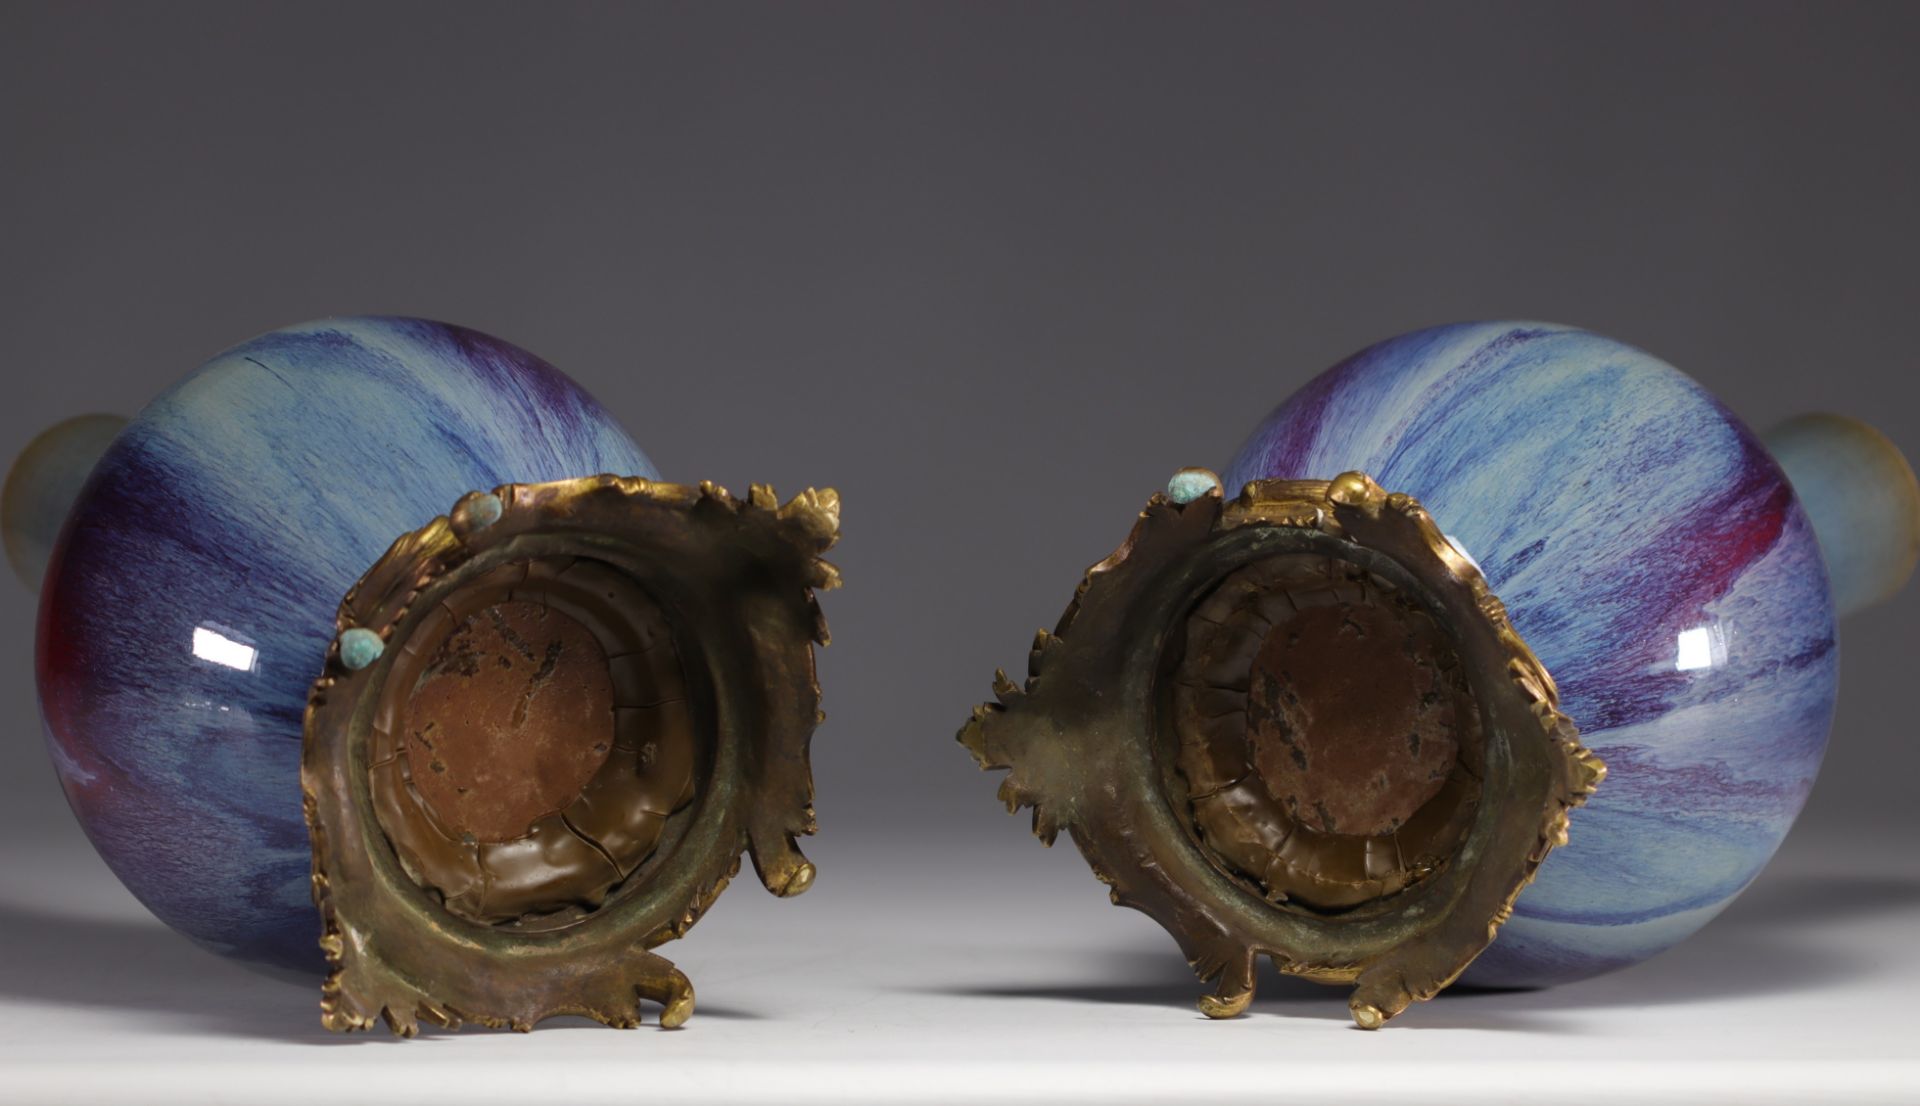 Rare pair of porcelain vases with flamed glaze mounted on bronze from 18th century - Bild 5 aus 5